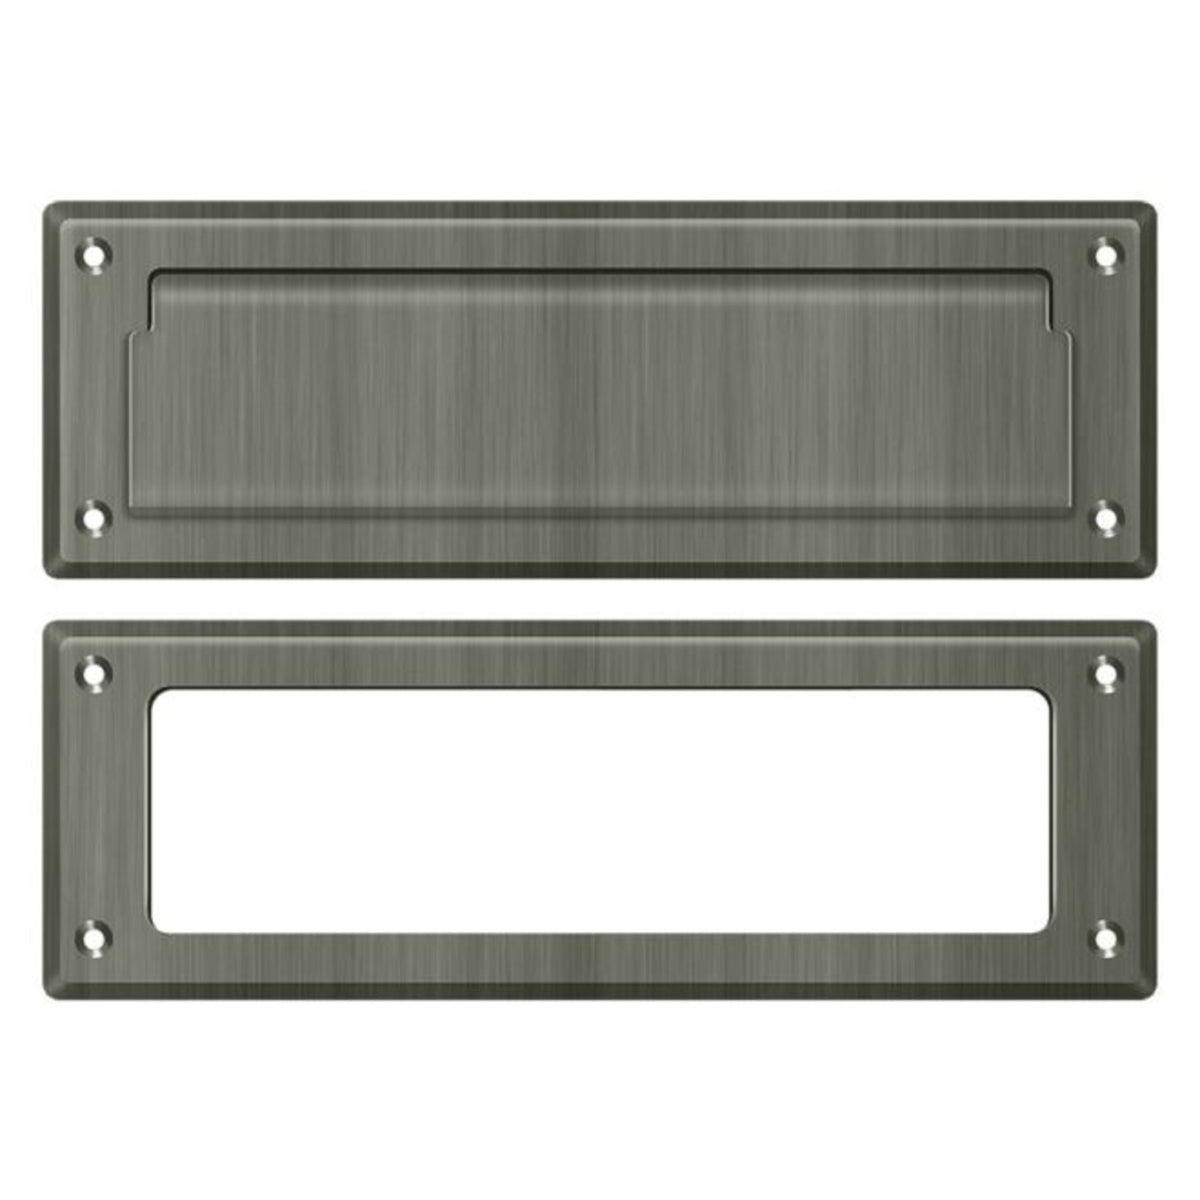 Deltana MS626U15A Mail Slot With Interior Frame, Antique Nickel